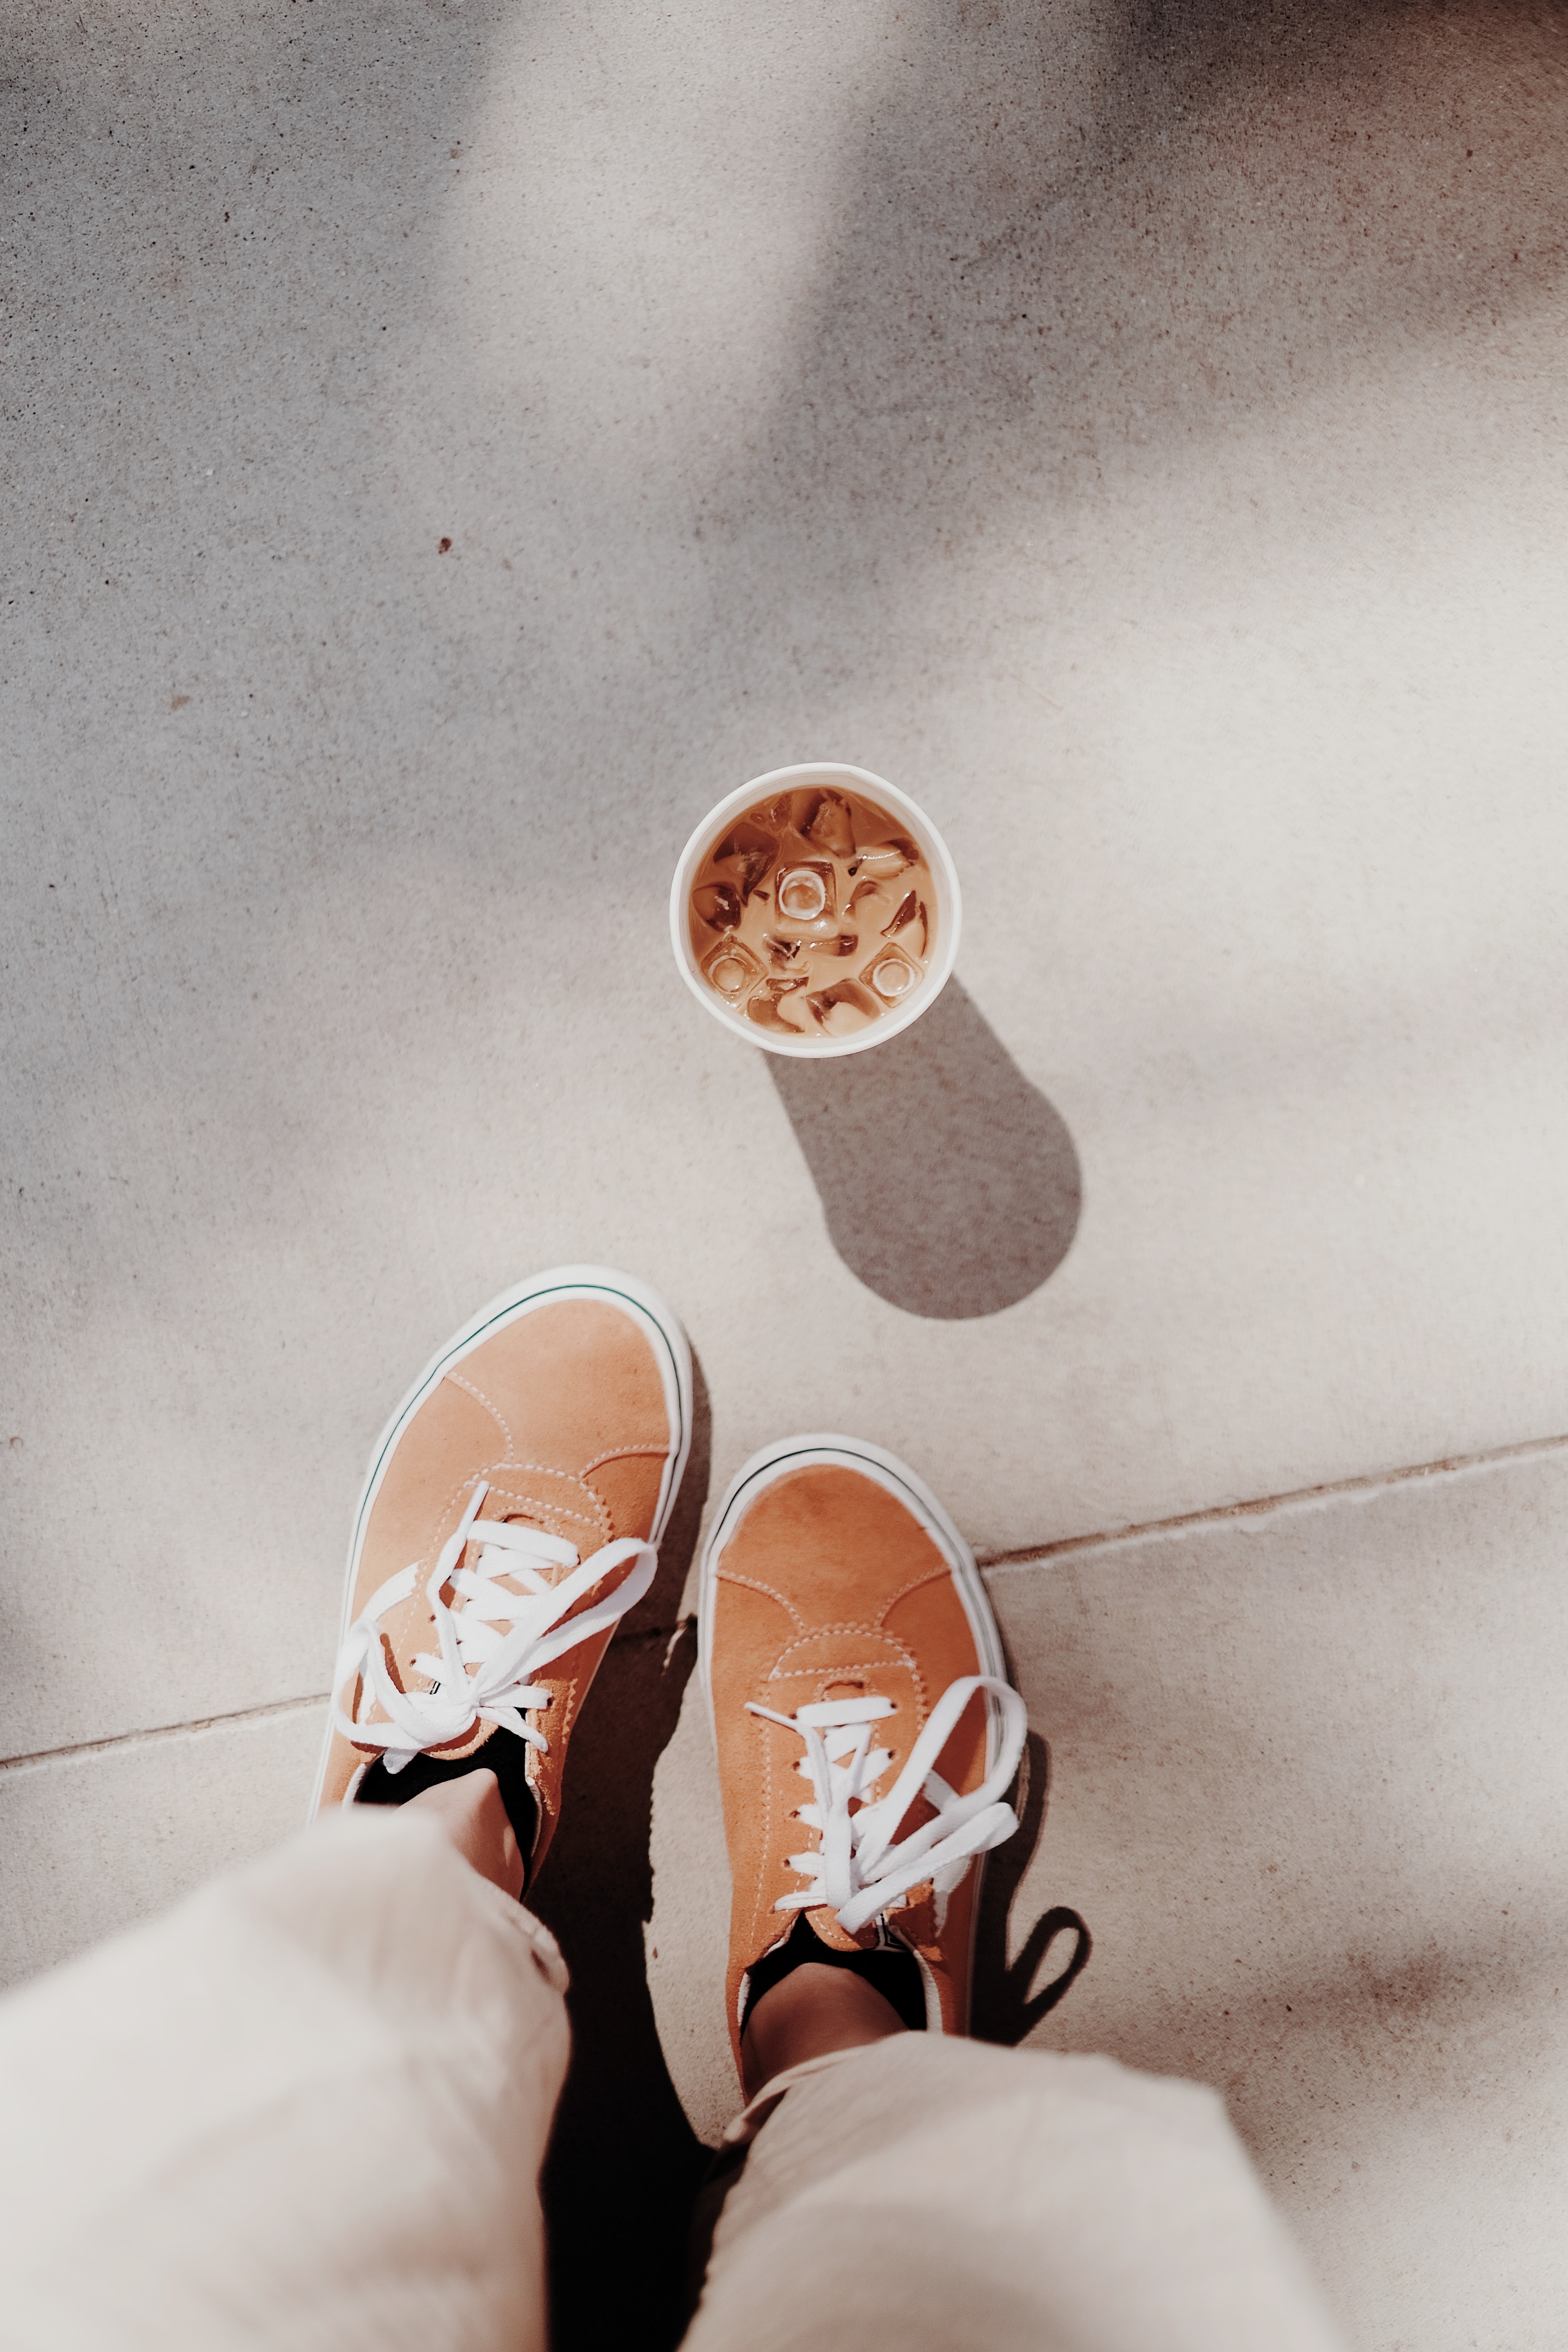 Free download wallpaper Miscellanea, Miscellaneous, Legs, Sneakers, Beverage, Shoes, Ice, Drink, Coffee on your PC desktop